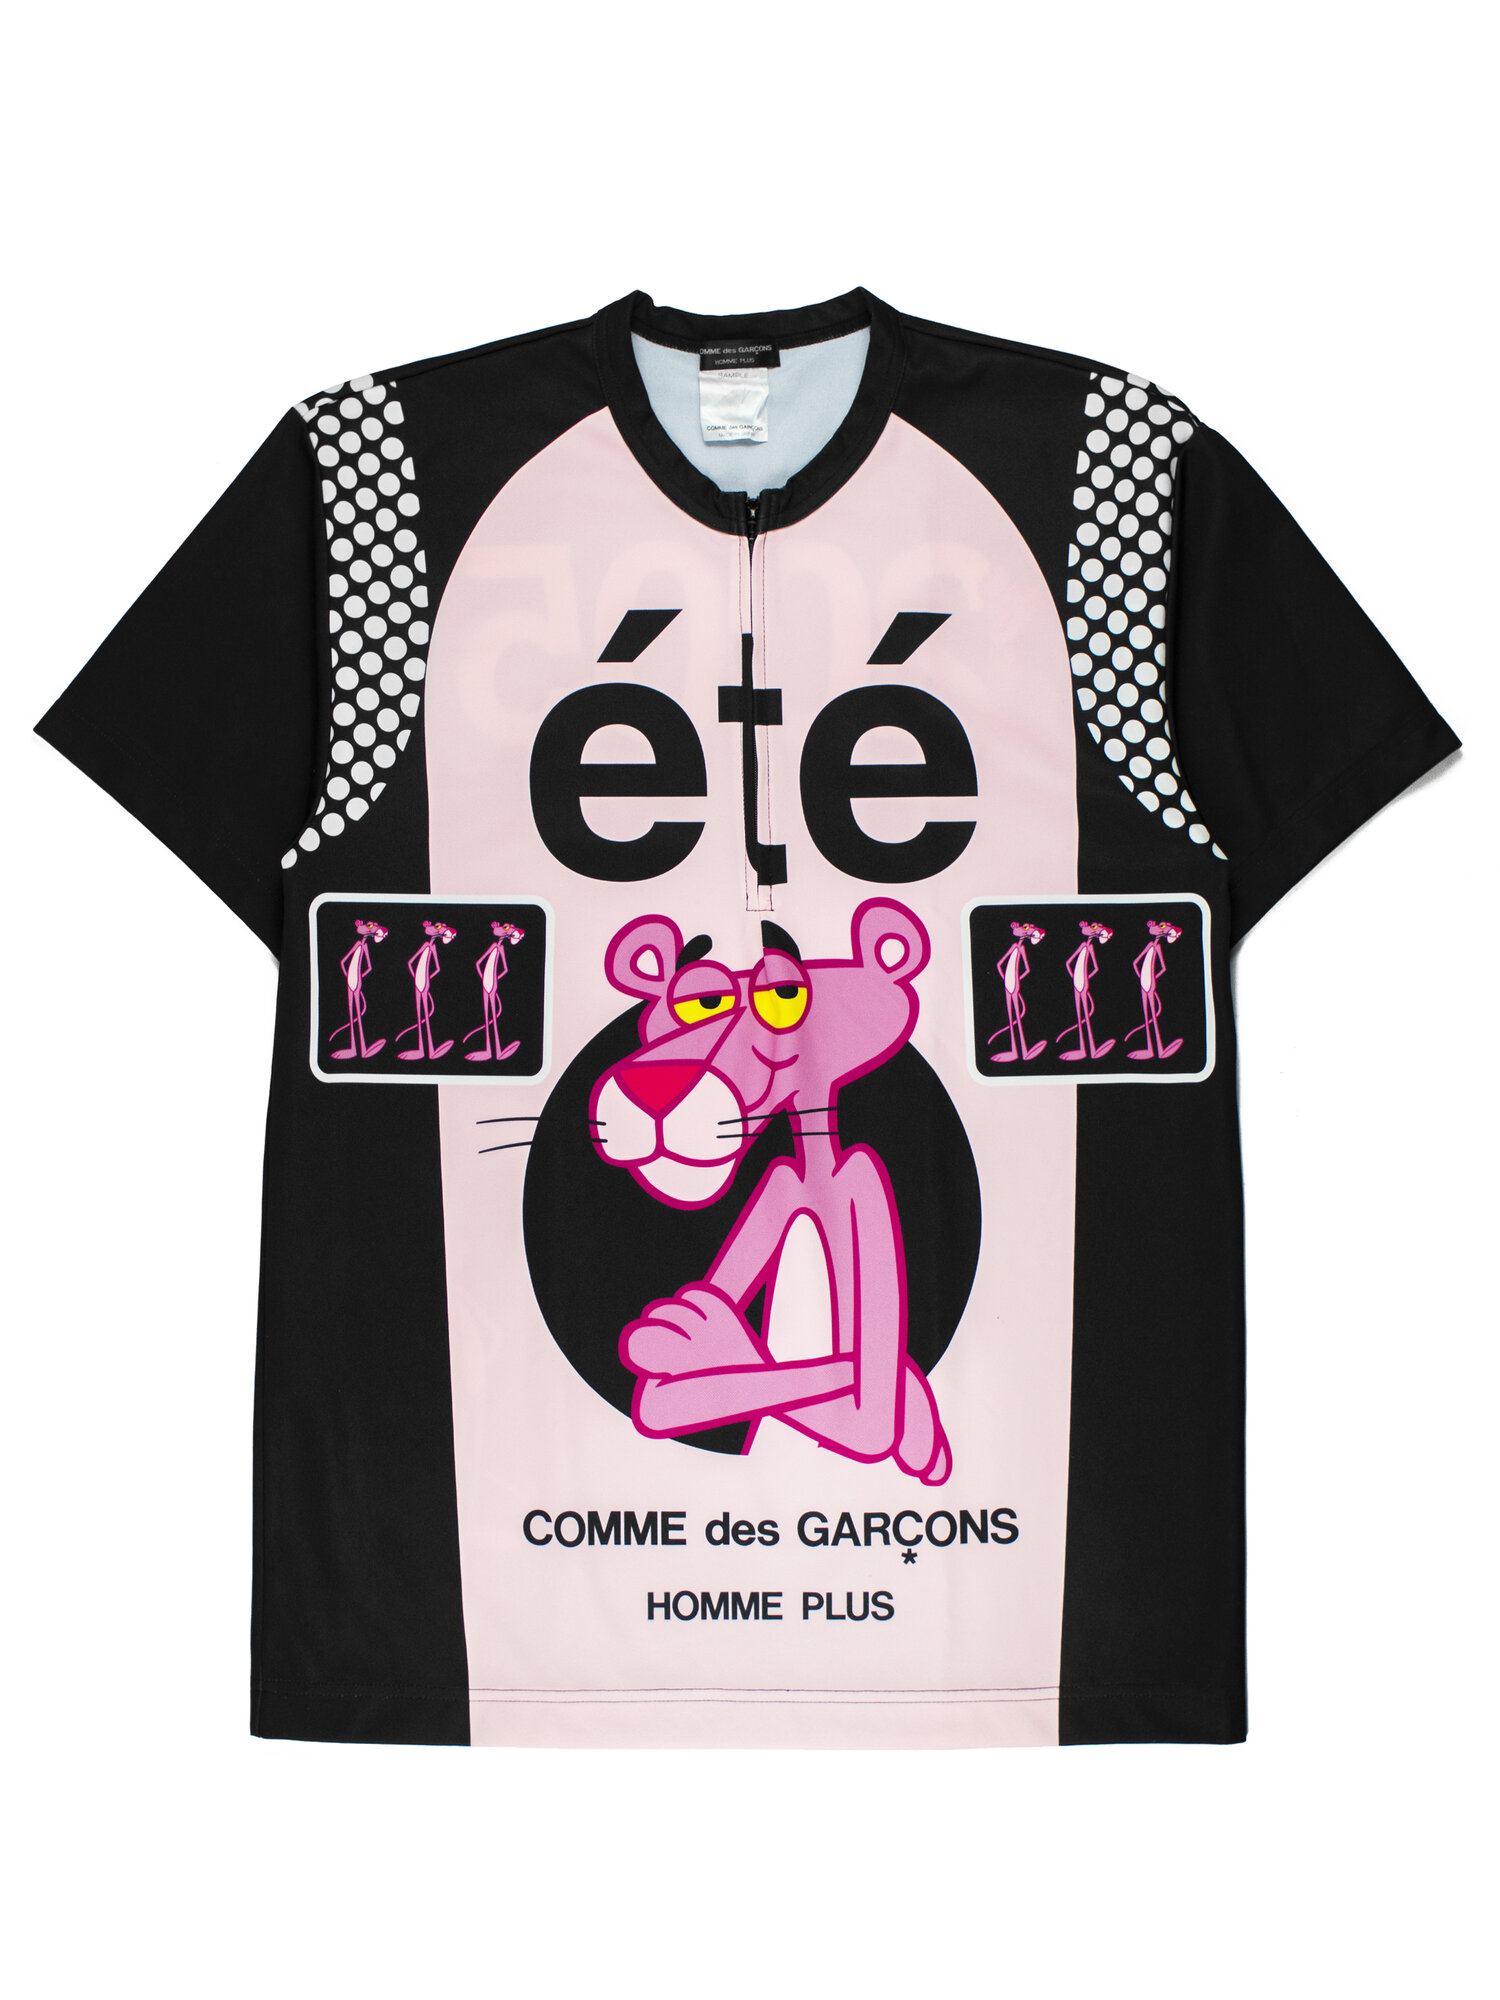 Comme des Garçons Homme Plus SS2005 Sample Pink Panther Cycling Jersey —  Middleman Store